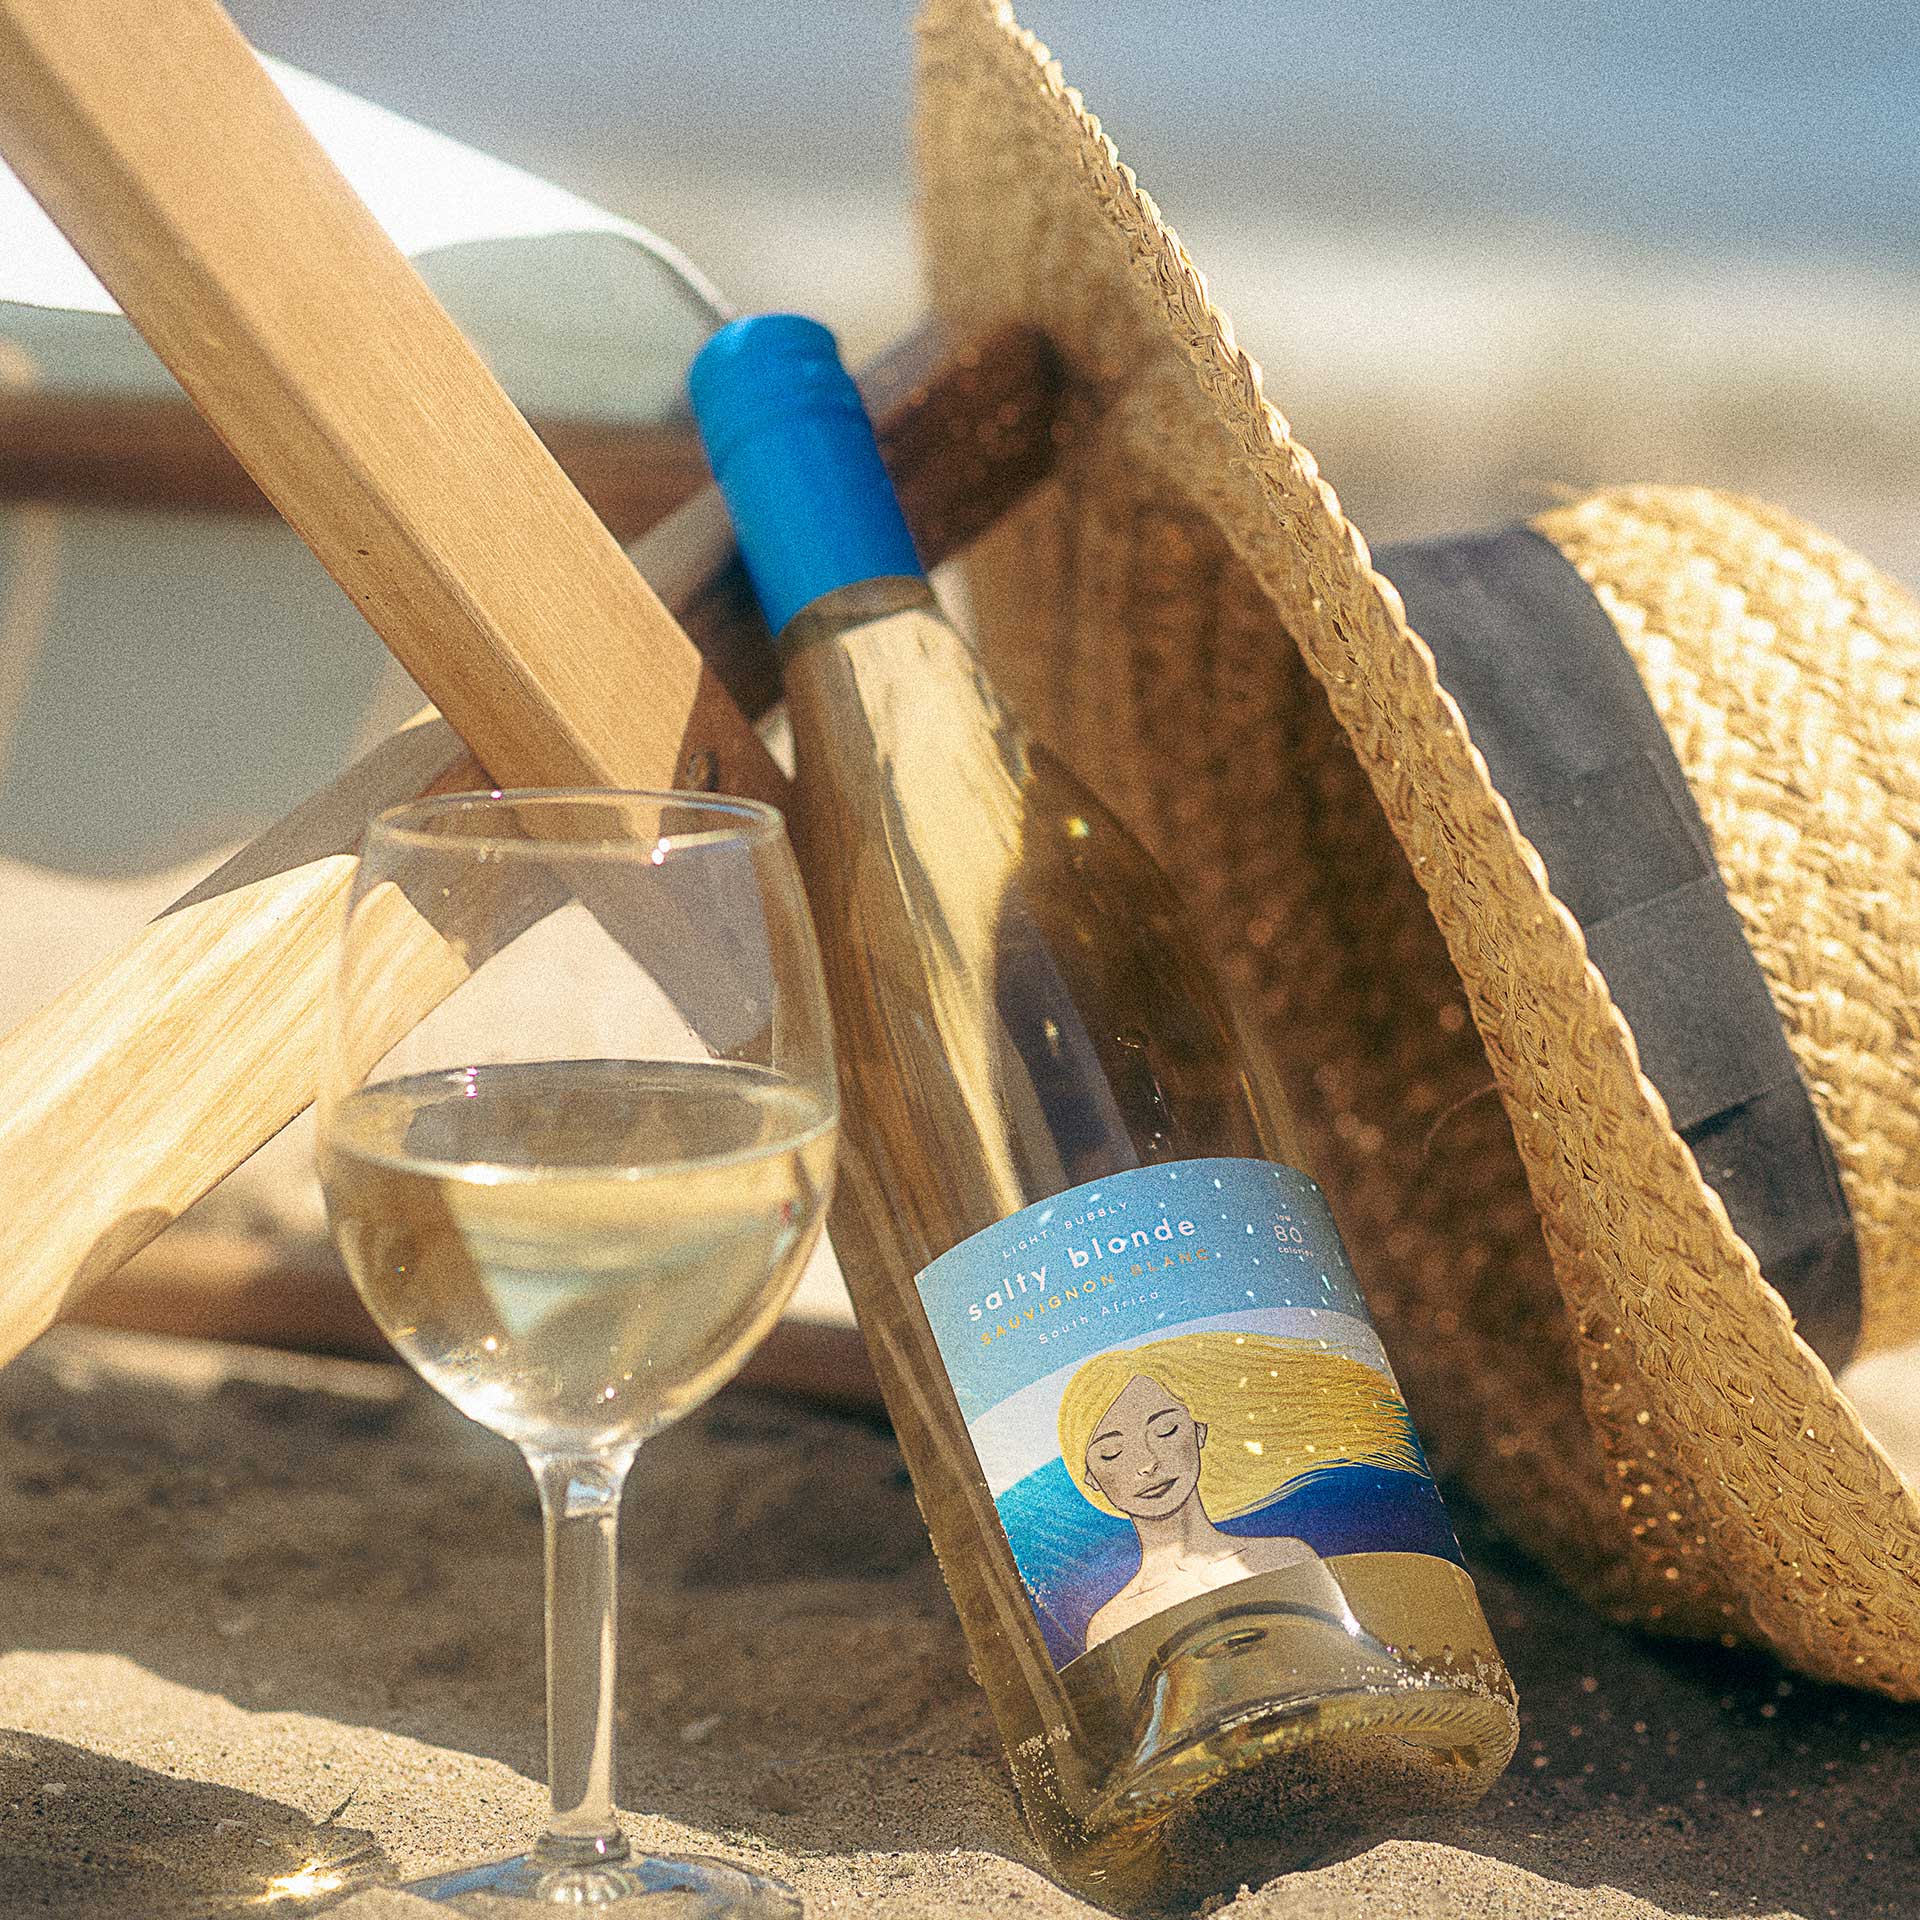 salty blonde wine bottle and glass with hat on sand